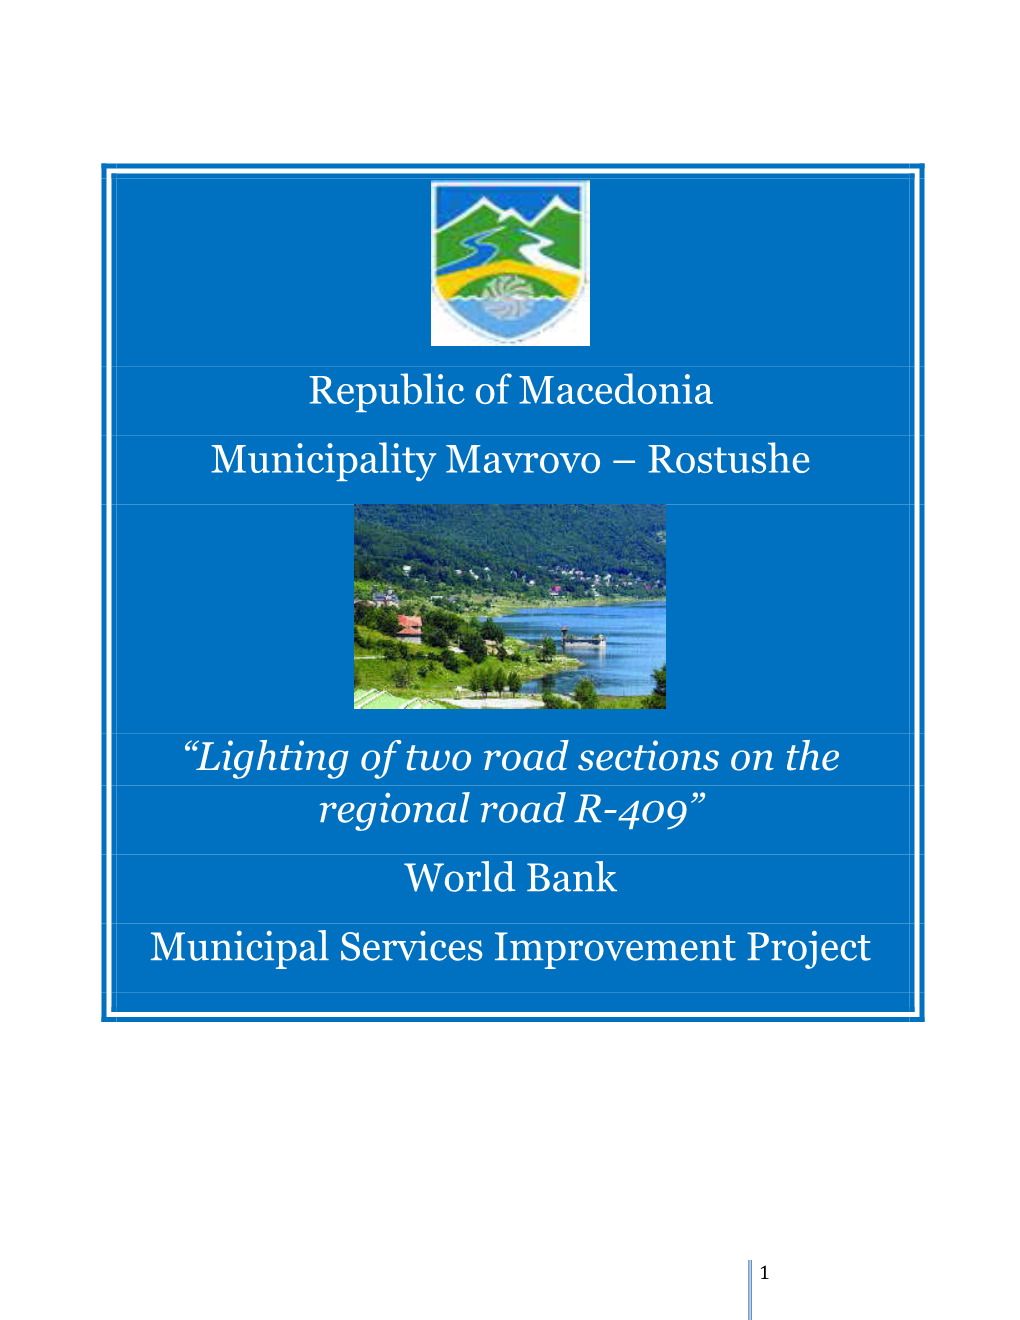 Republic of Macedonia Municipality Mavrovo – Rostushe “Lighting of Two Road Sections on the Regional Road R-409” World